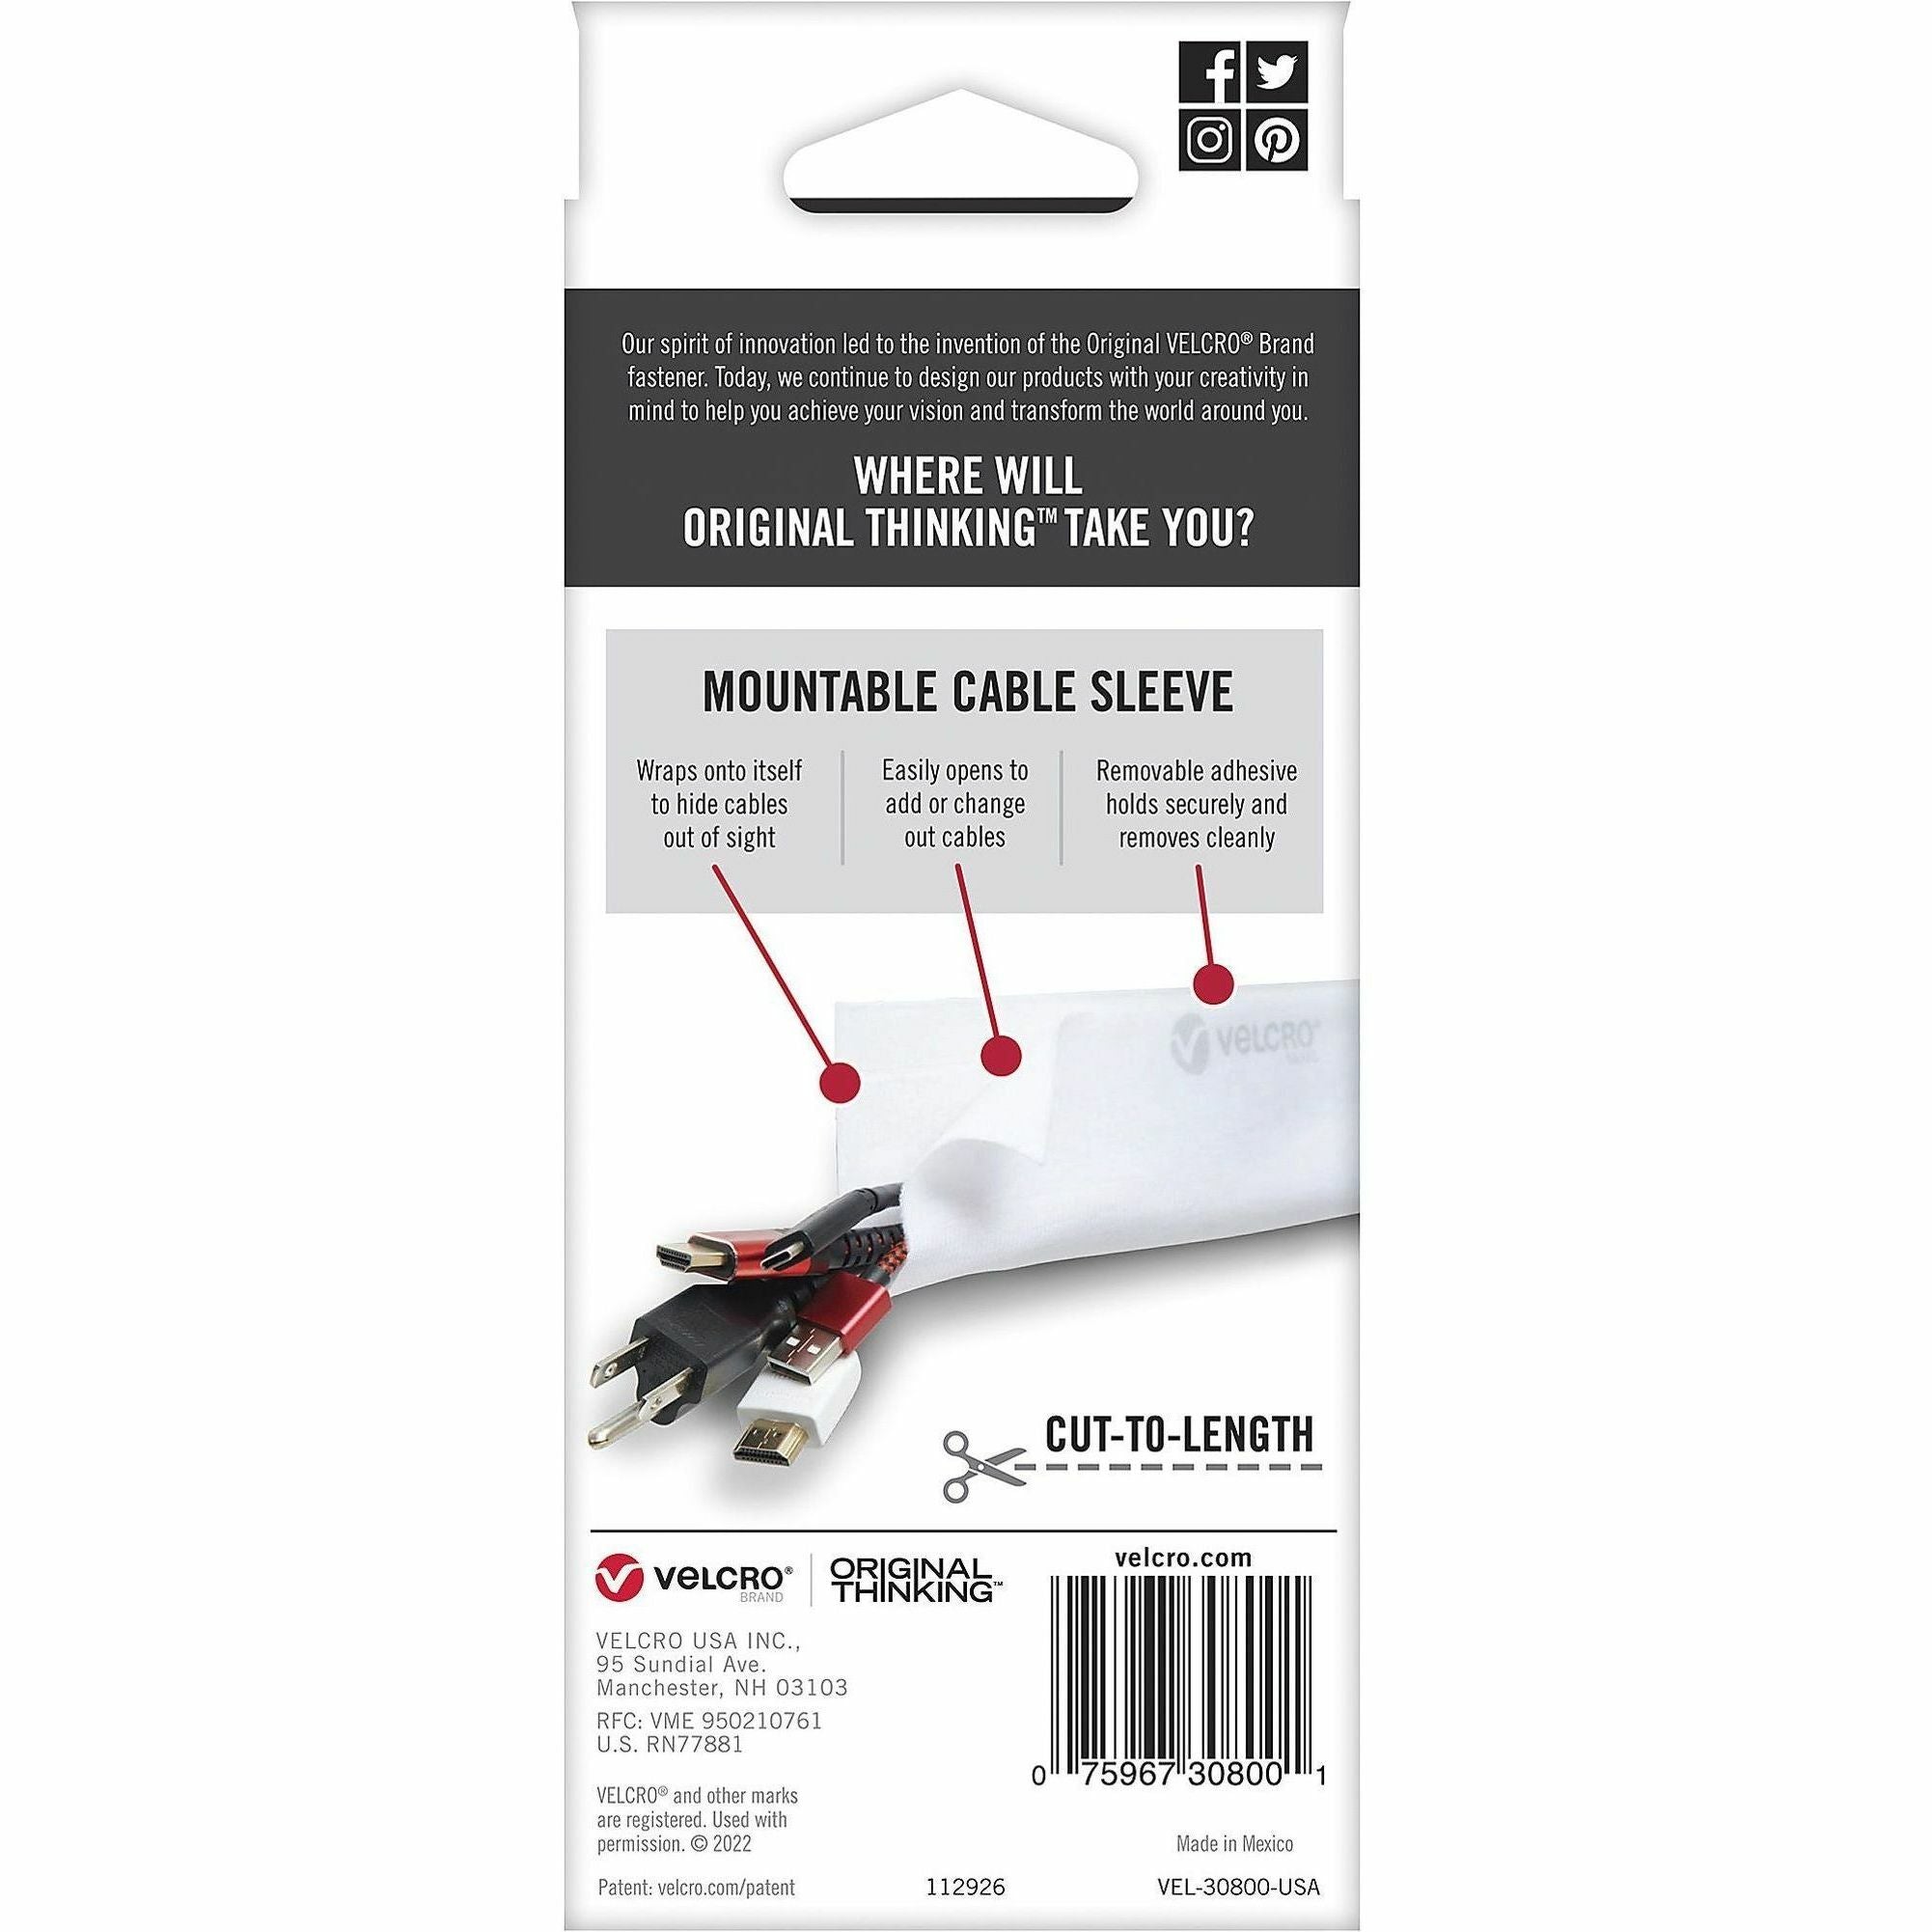 velcro-mountable-cut-to-length-cable-sleeves-cable-sleeve-white-1-36-length_vek30800 - 2